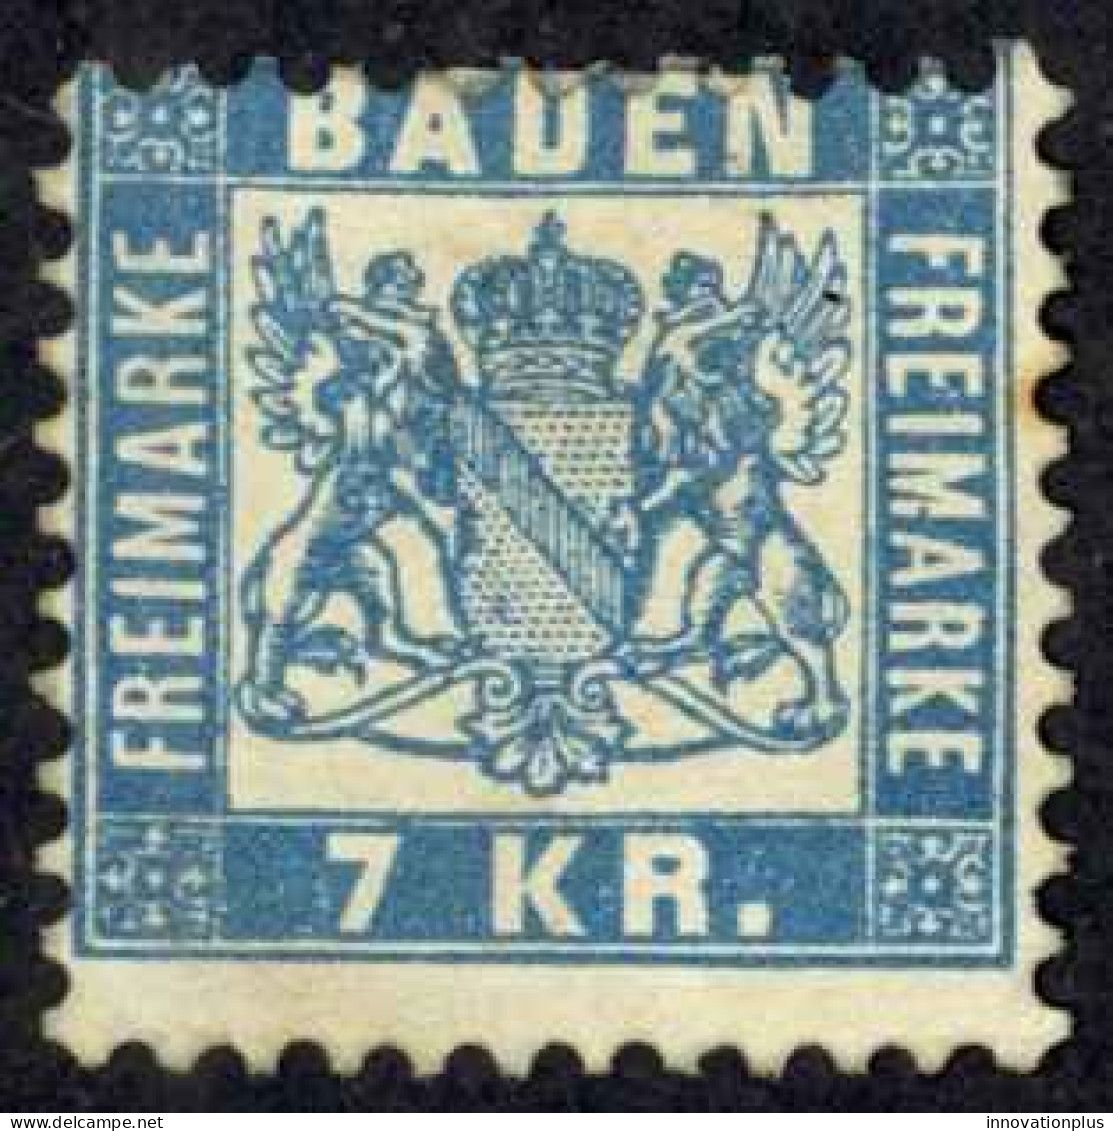 Germany Baden Sc# 28 MH 1868 7kr Dull Blue Coat Of Arms - Neufs